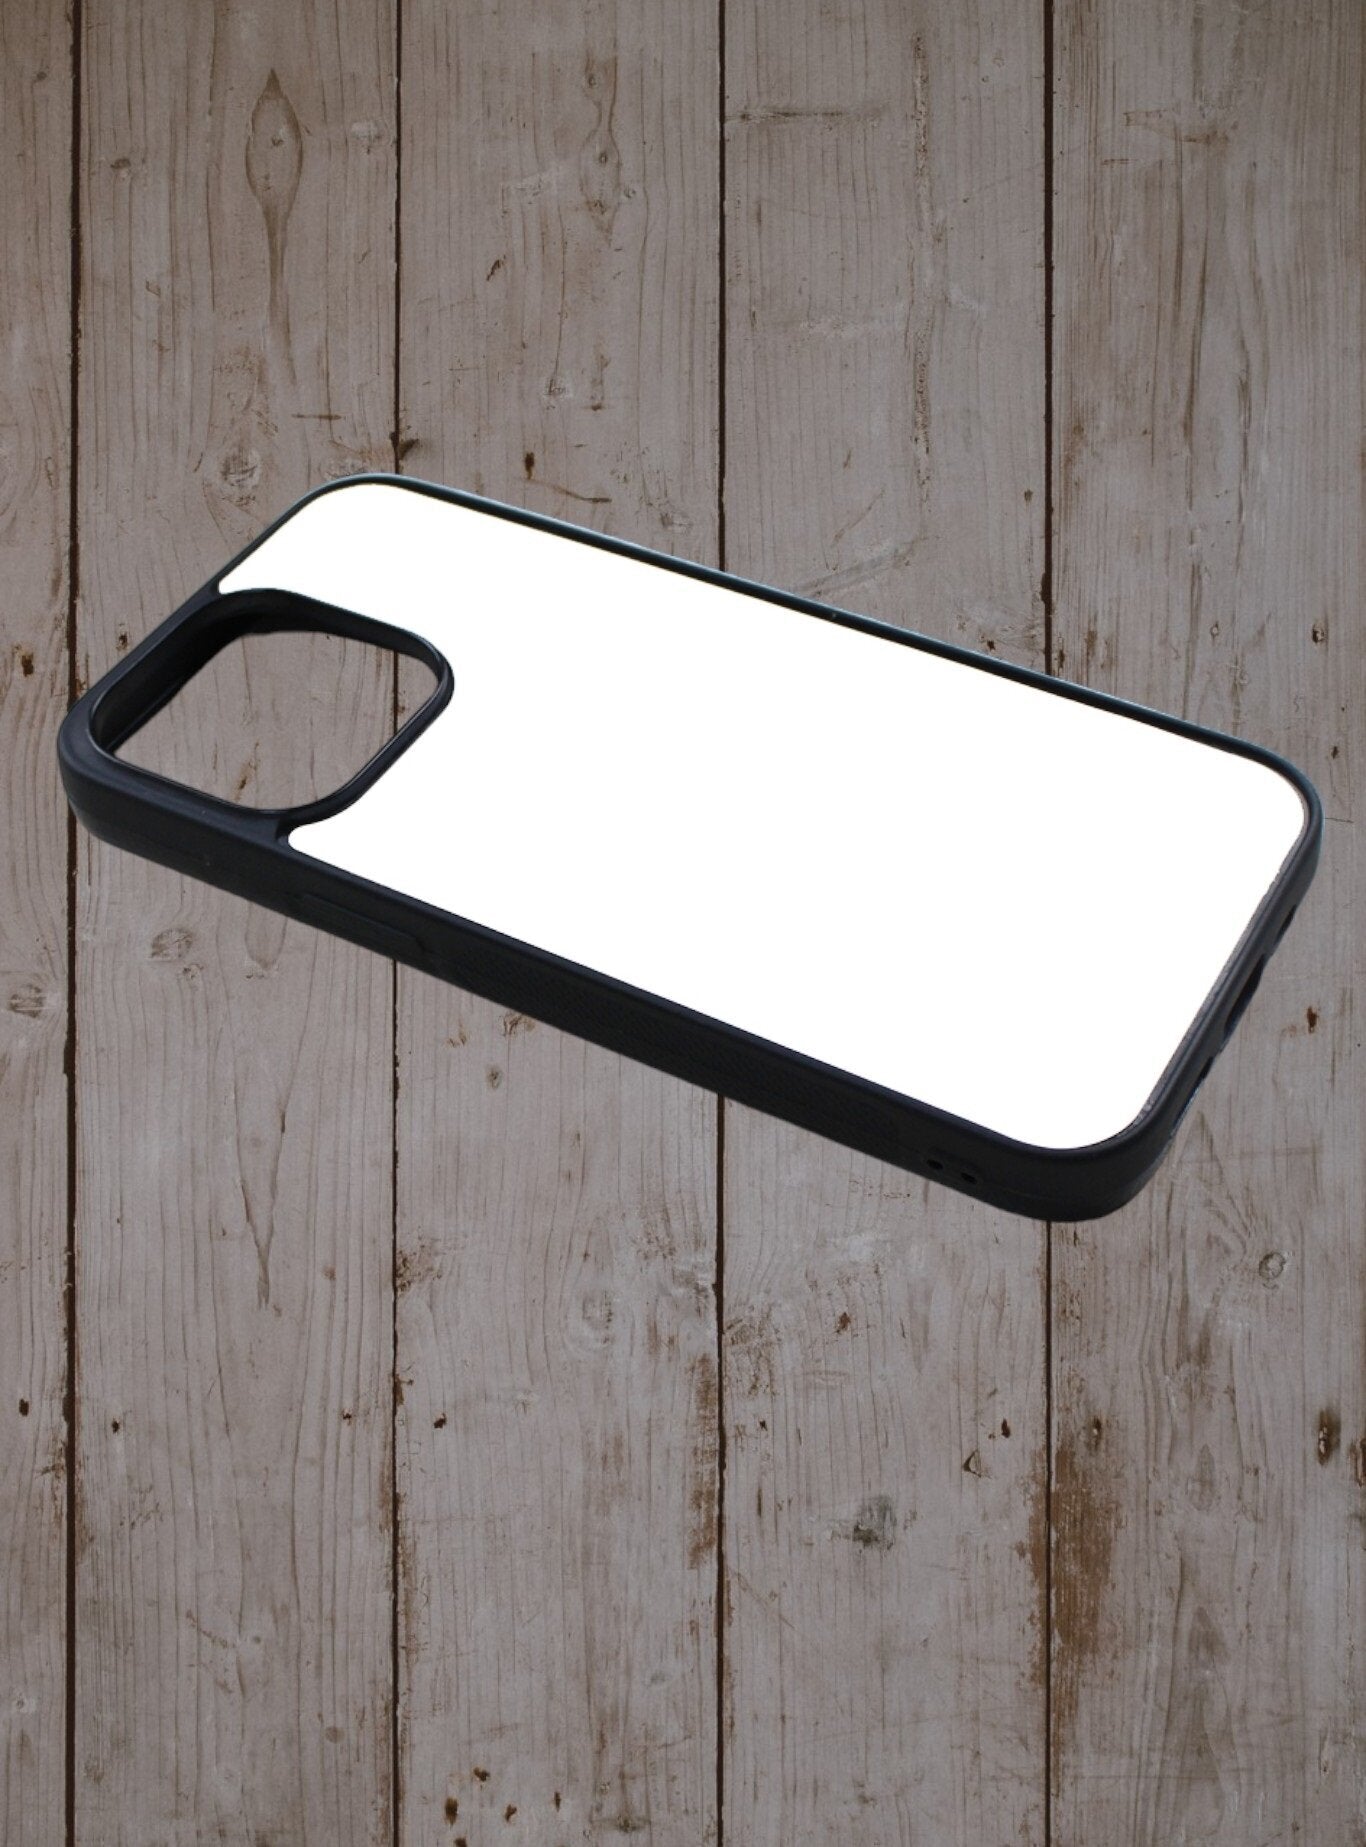 Coque Iphone - Sanglier